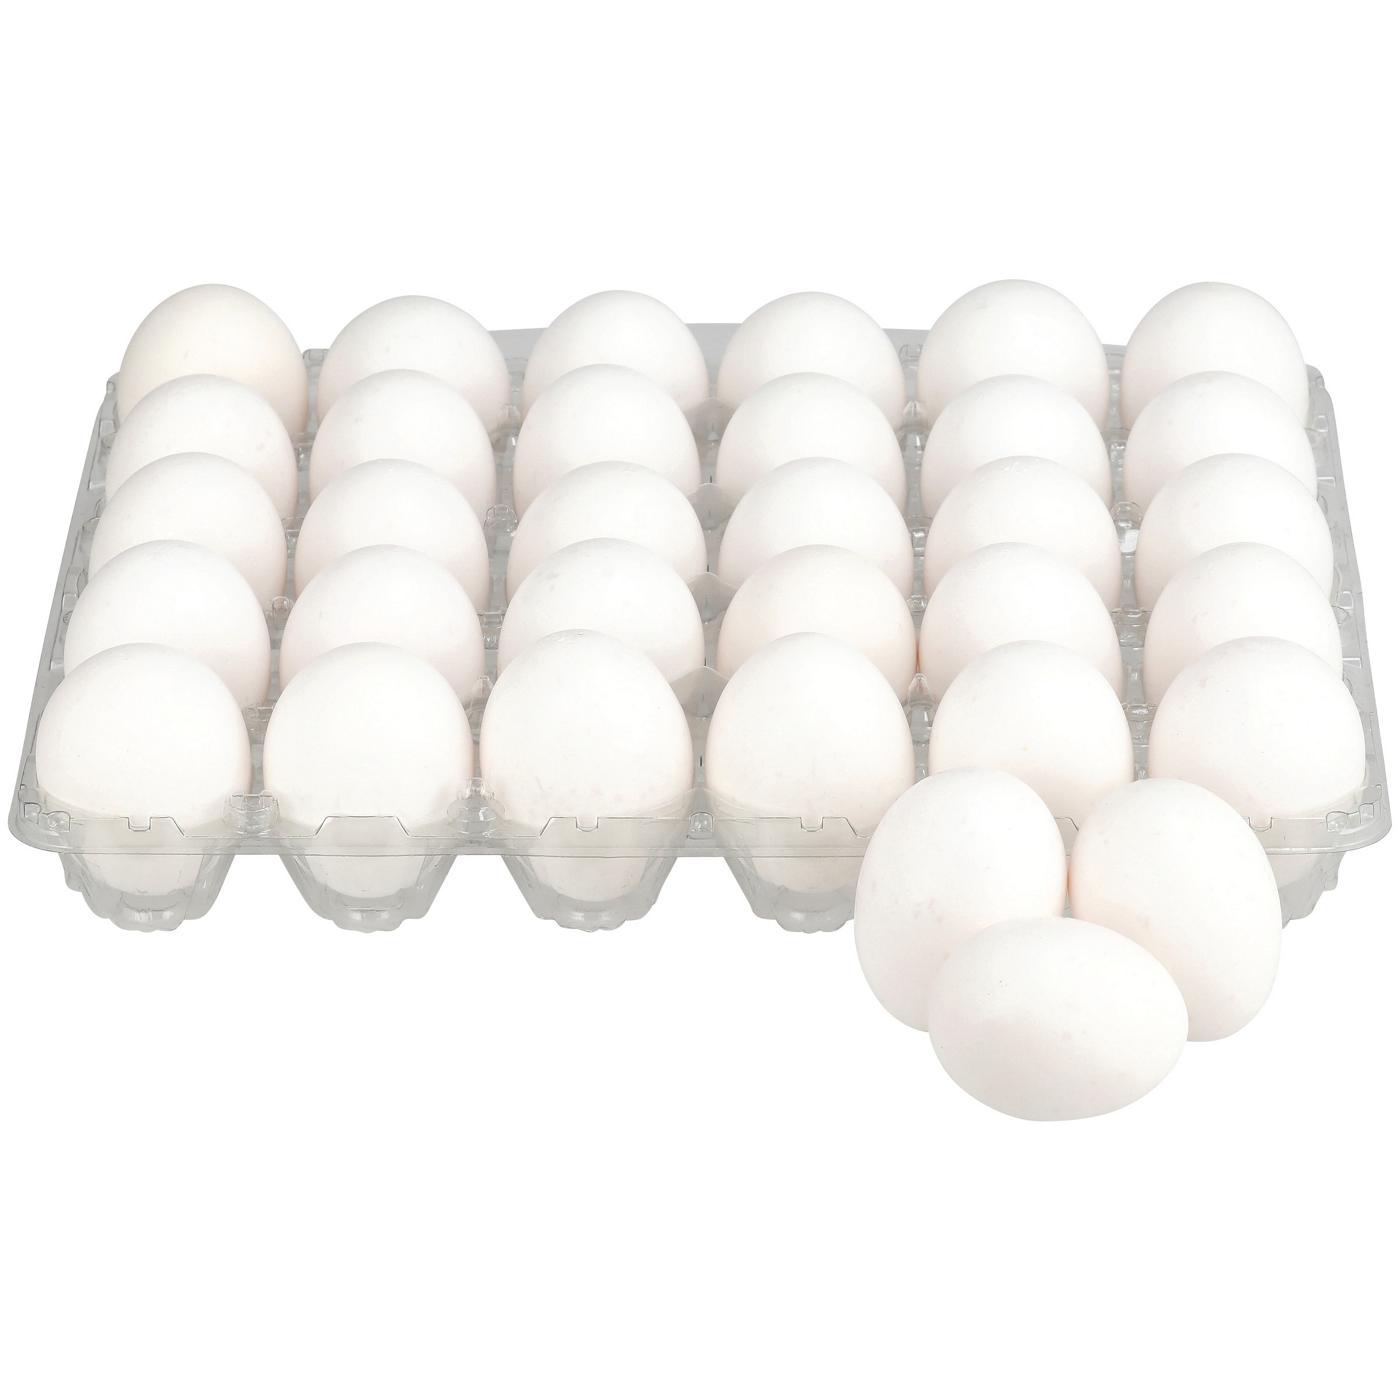 H-E-B Grade AA Cage Free Extra Large White Eggs; image 3 of 6